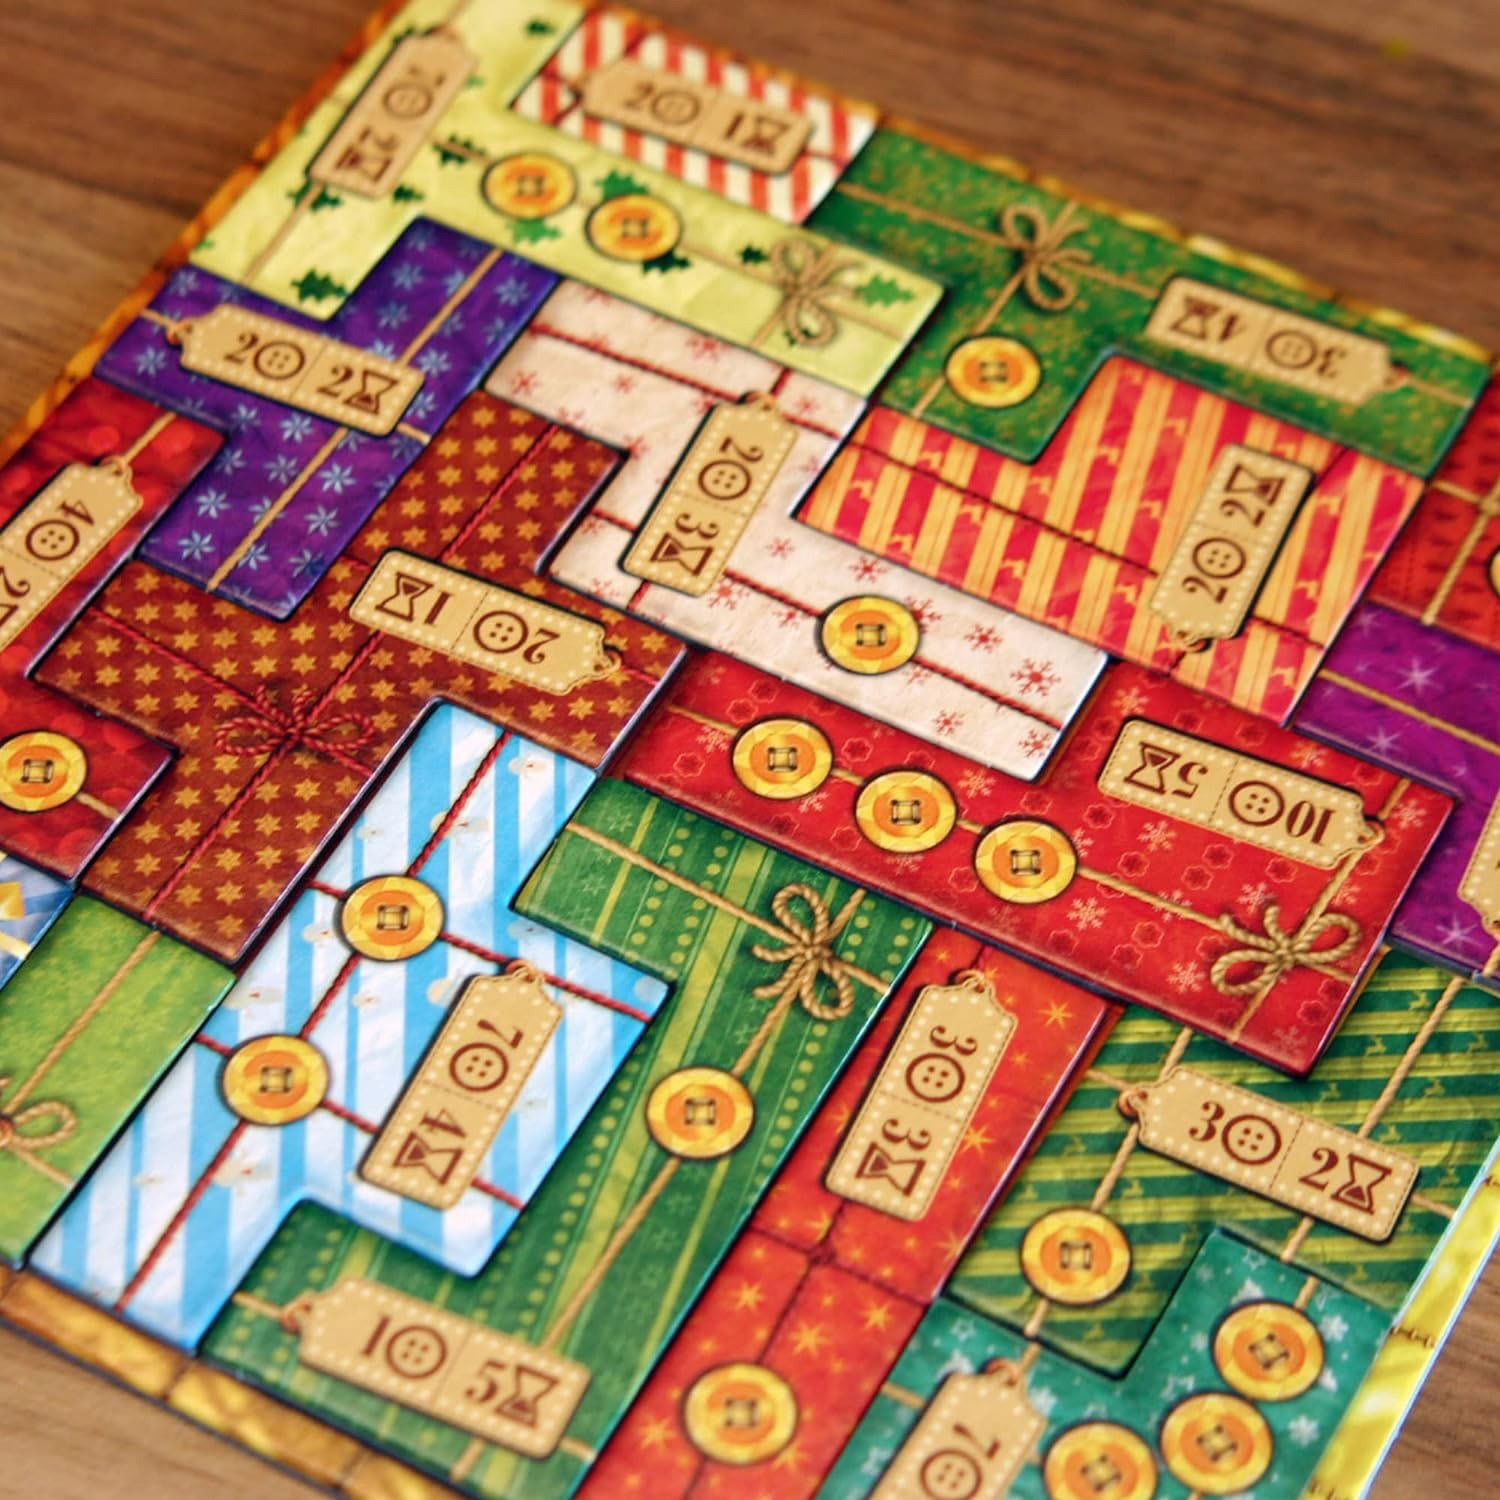 patchwork boardgame